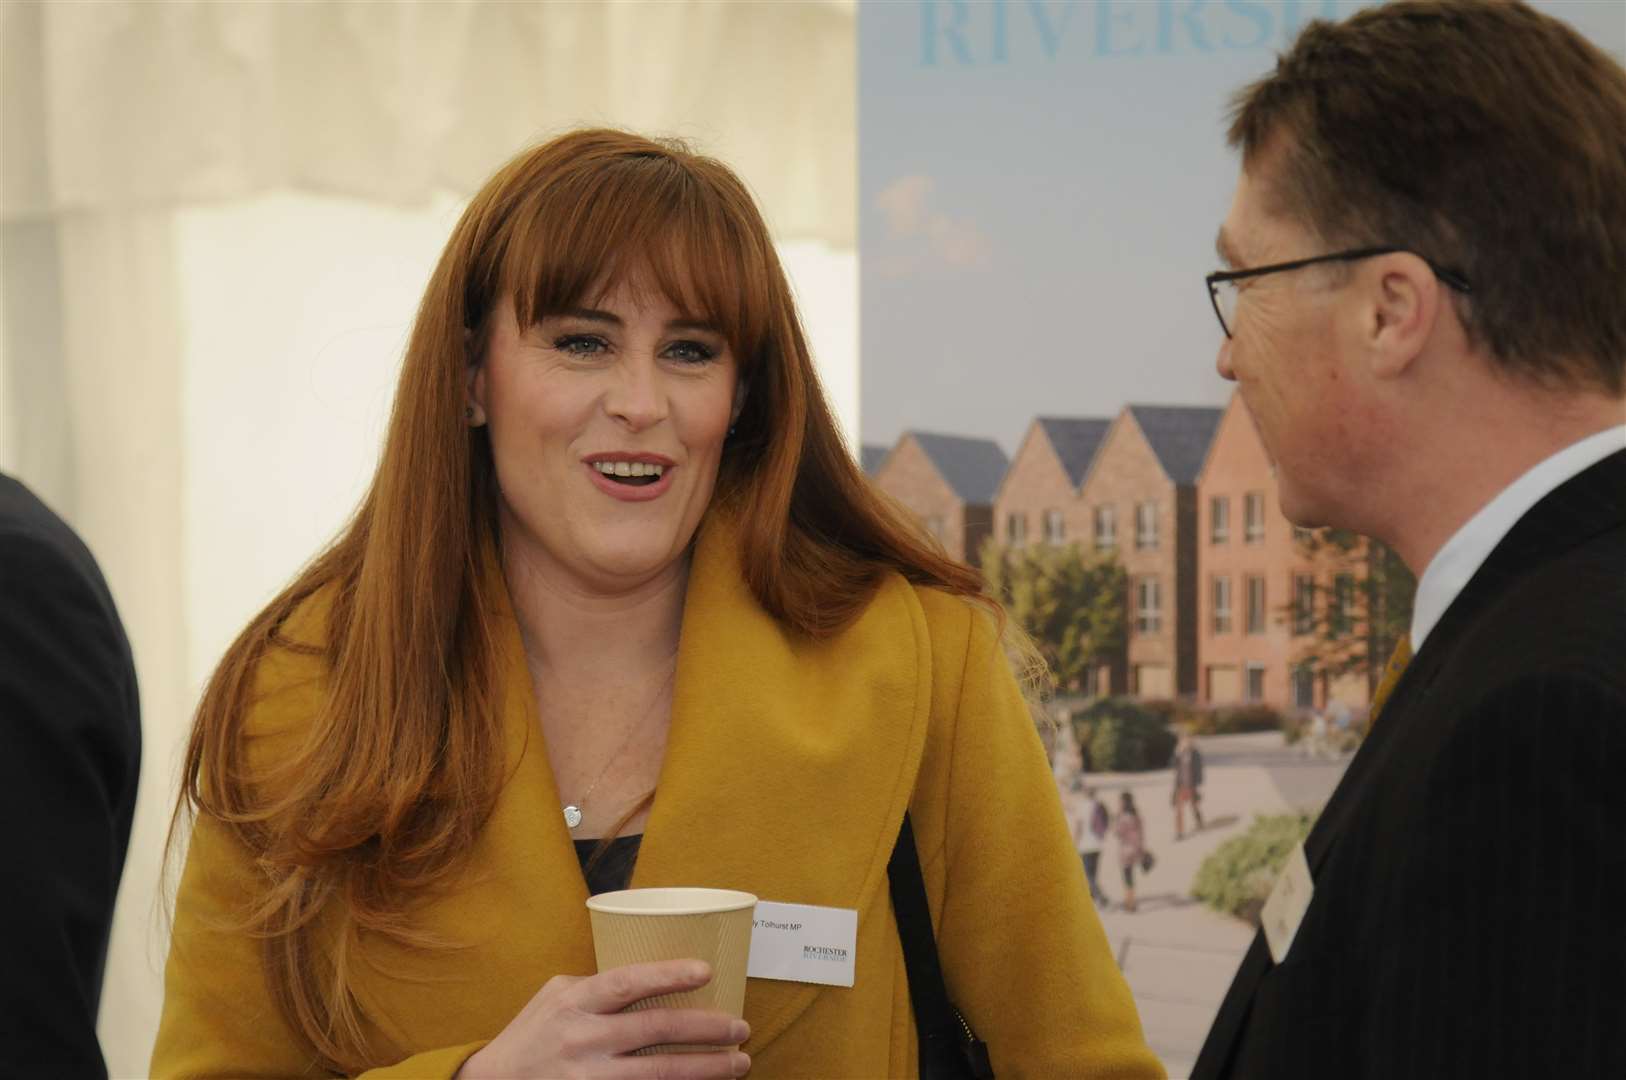 MP Kelly Tolhurst is now small business minister